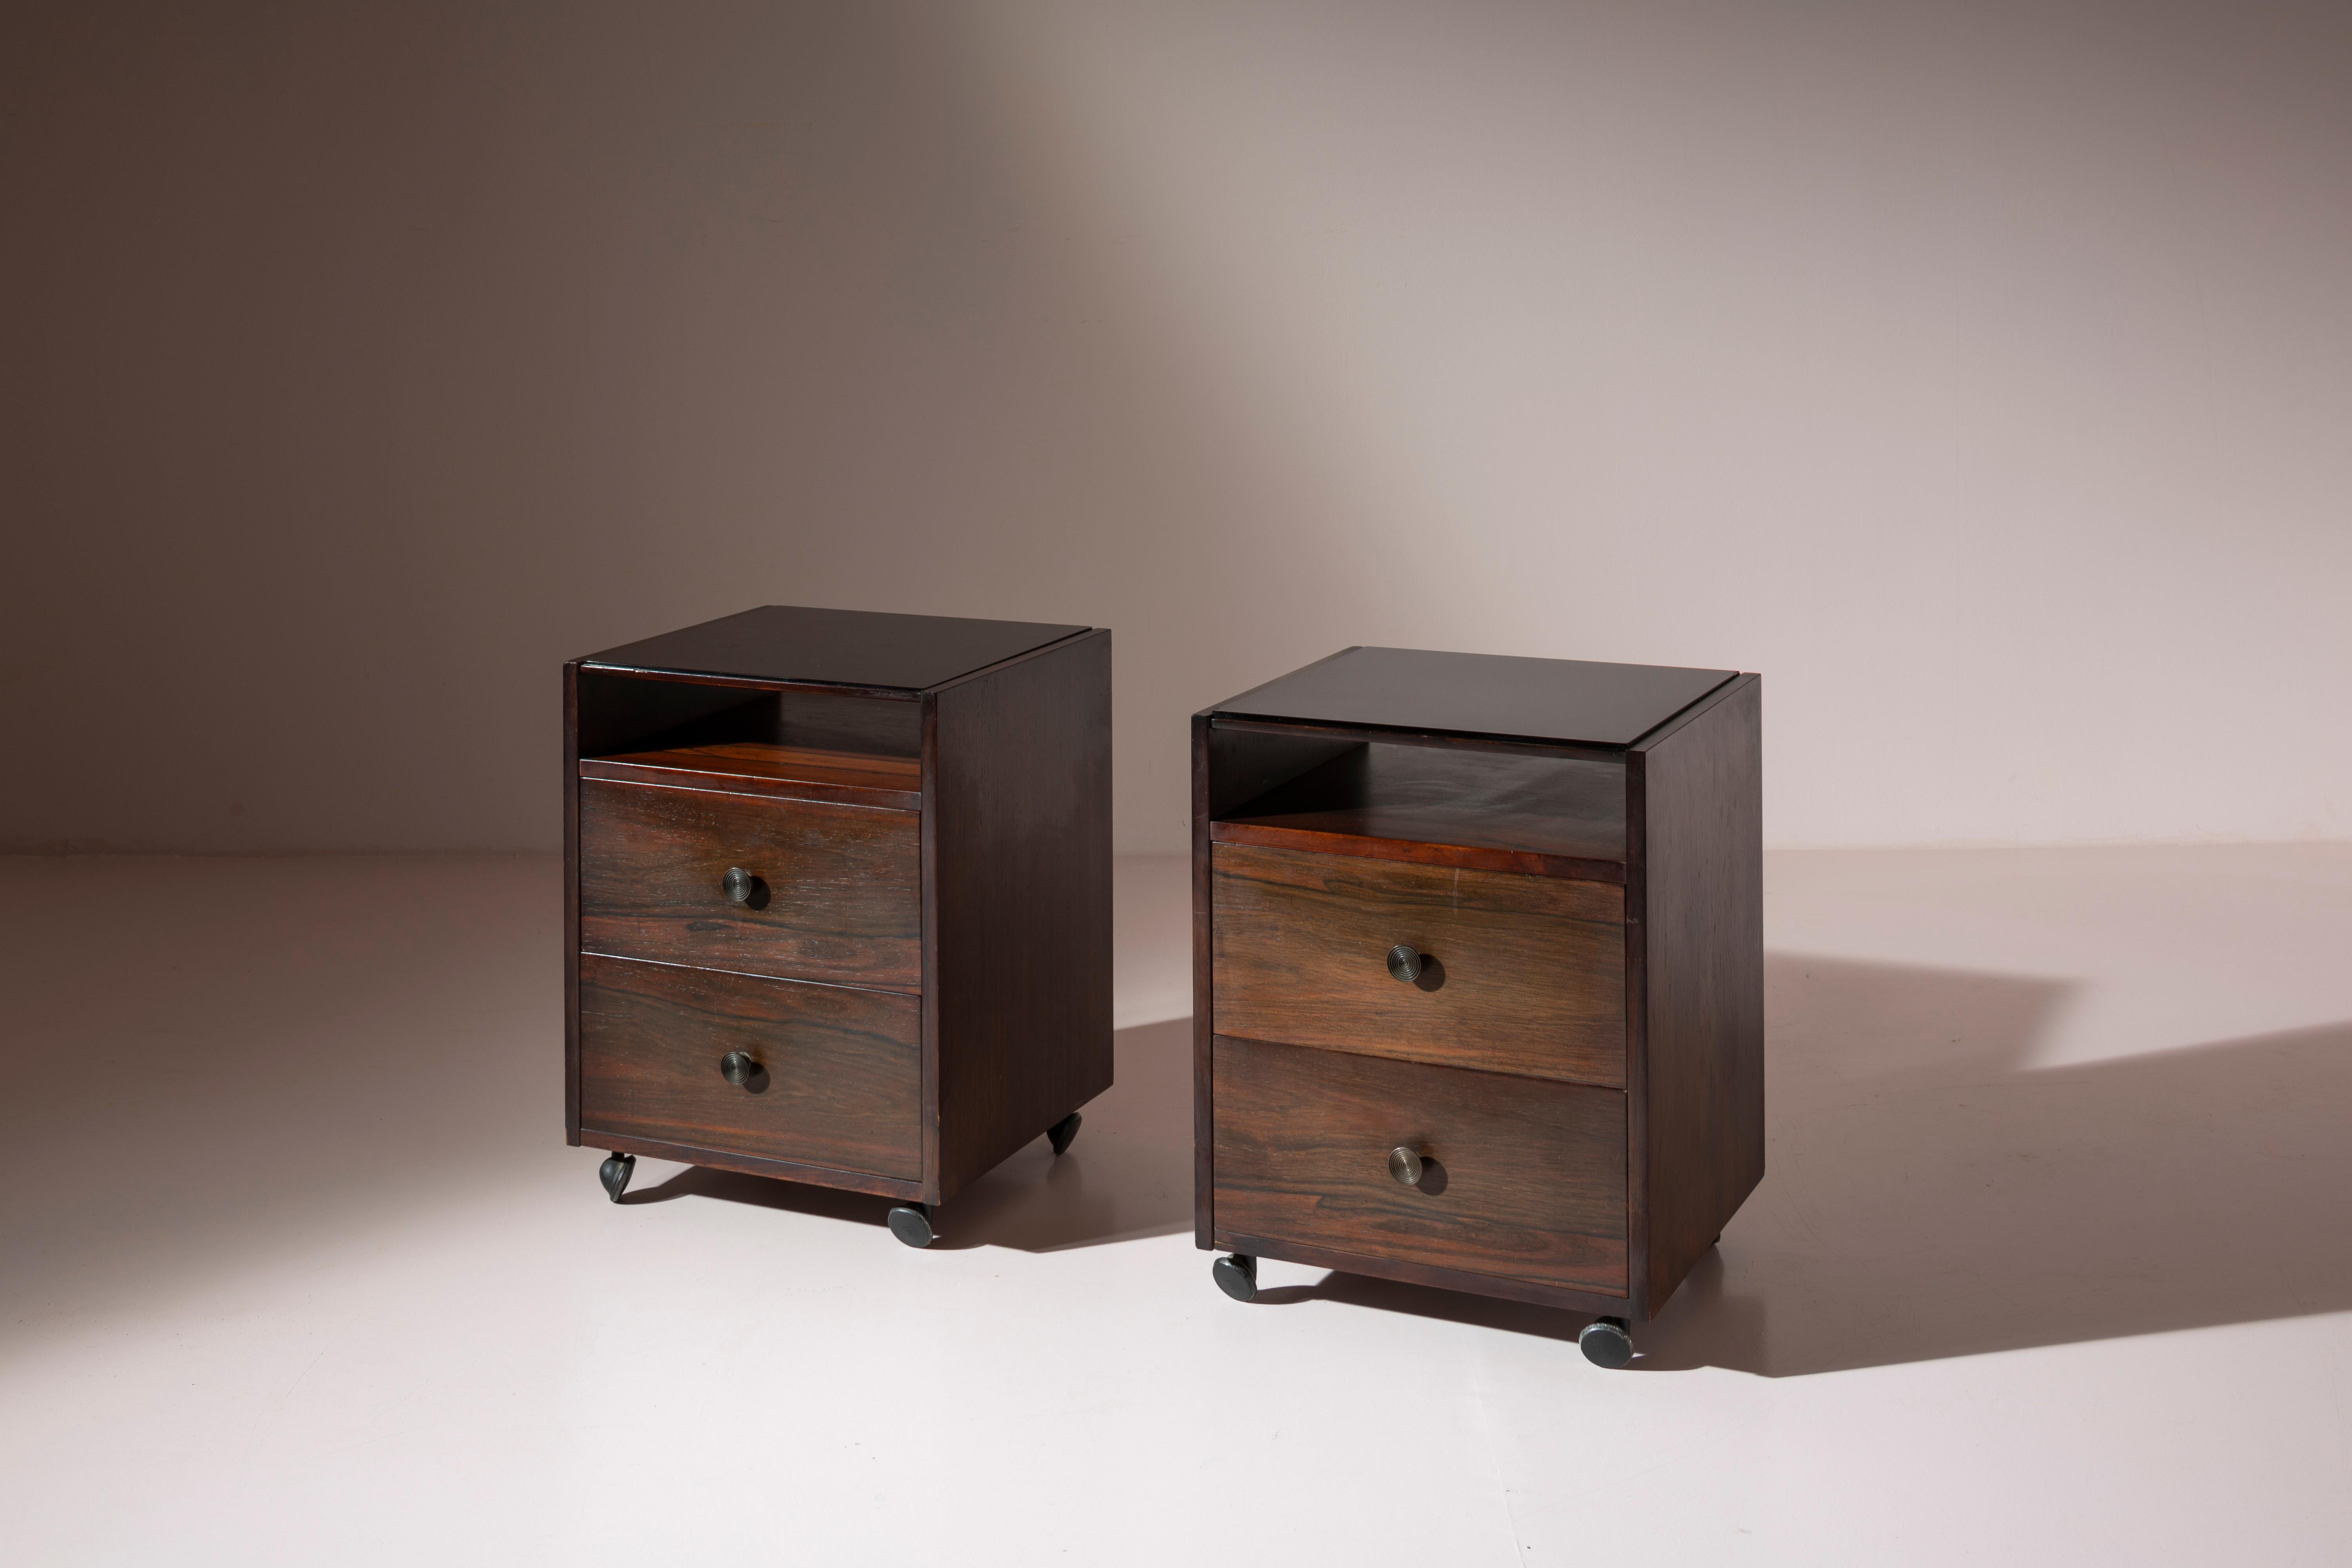 Pair of walnut wood and glass bedside tables, designed by Carlo de Carli, produced by Sormani in 1964.

This pair of small wooden nightstands stands out for the precious interplay of shades, starting from the intricate grain of the wood used,